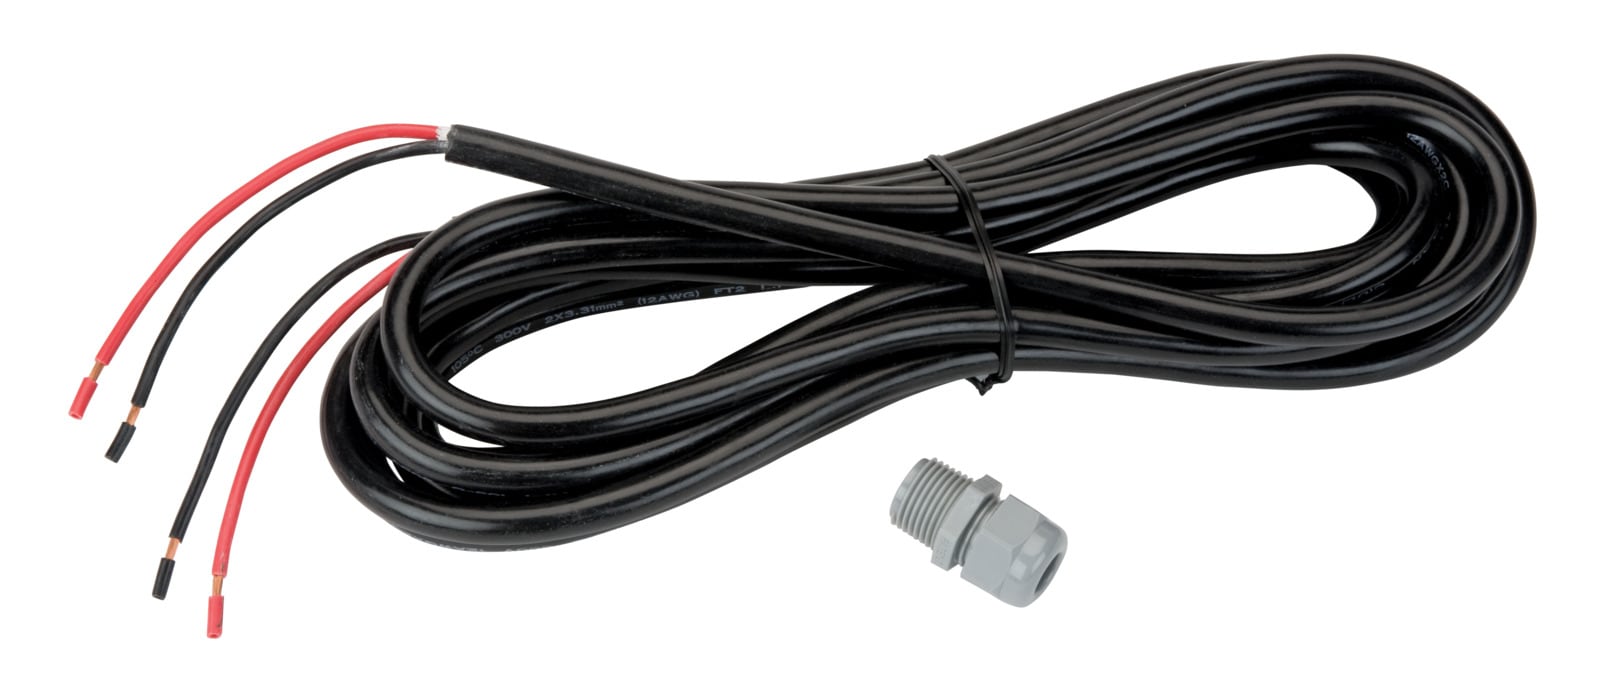 GPI 18' Power Cord for Fuel Transfer Pump Ethanol Free 4-cycle Fuel in the Power  Equipment Fuel department at